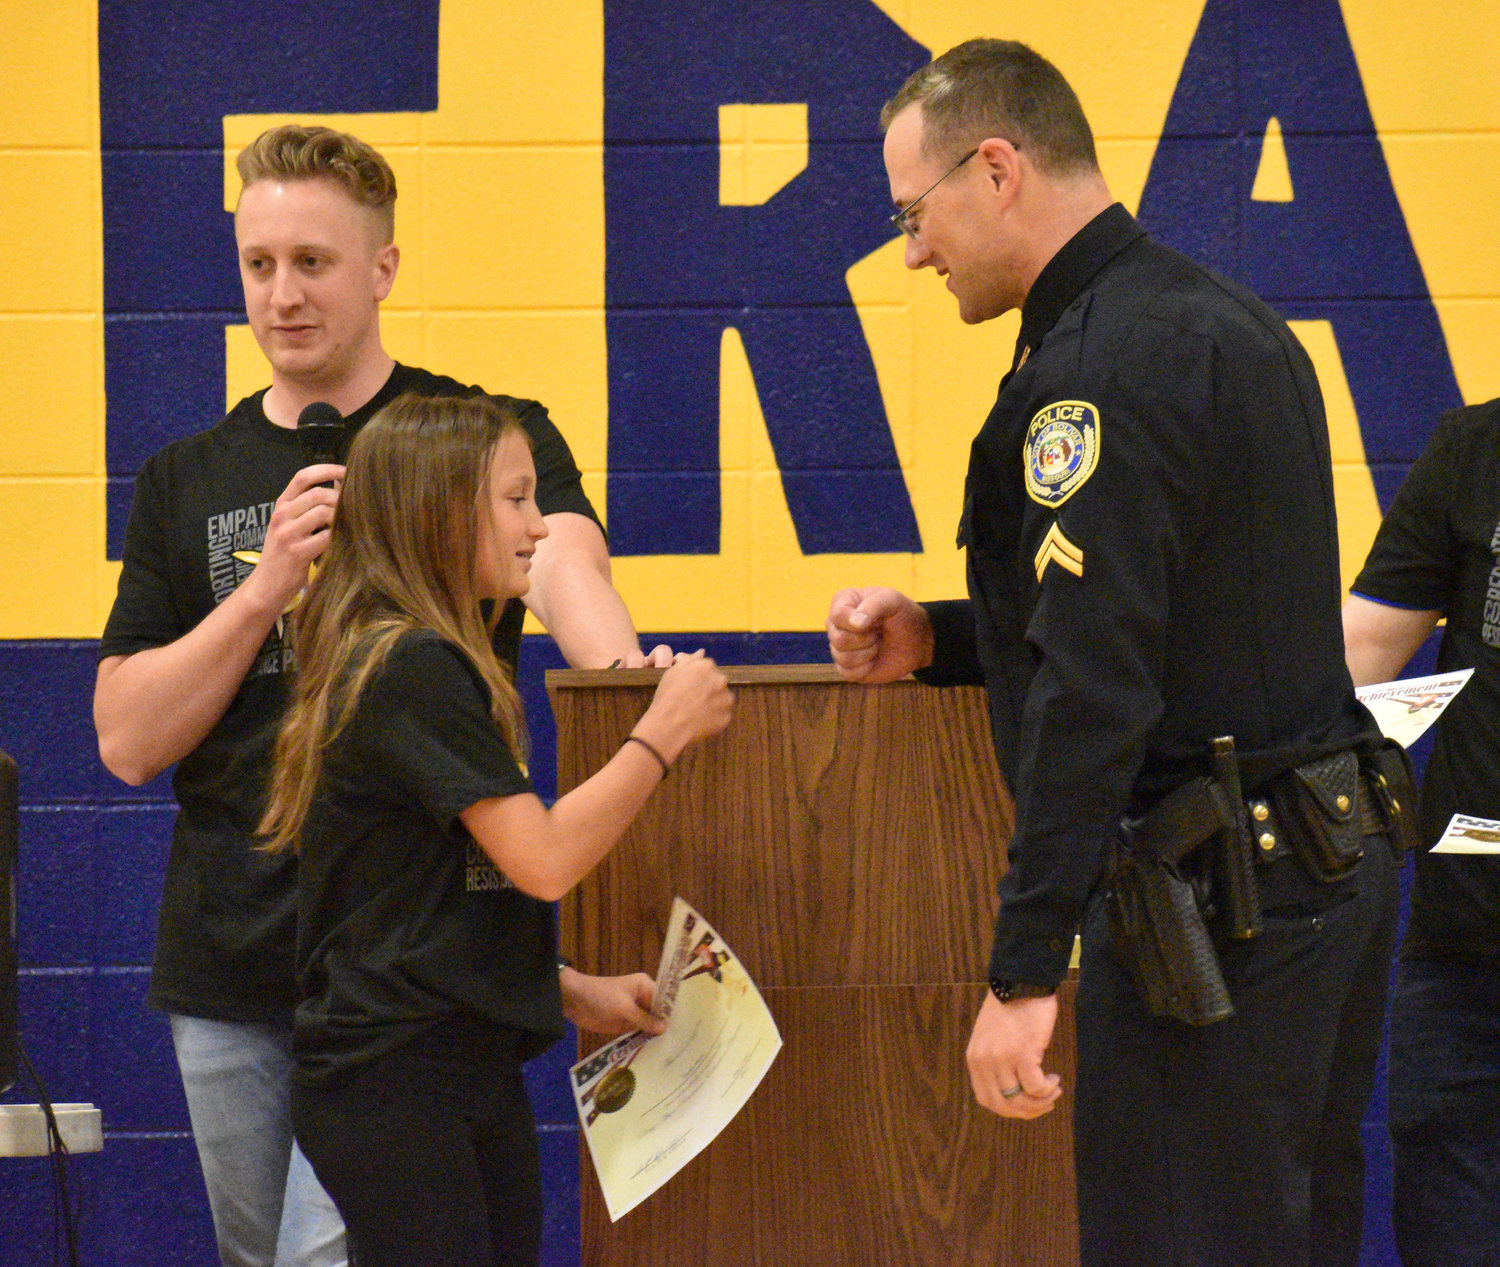 Taylor Mann gives Cpl. Scott Hendrickson a fist bump after he hands her a diploma. Also pictured is teacher Jacob Allee.